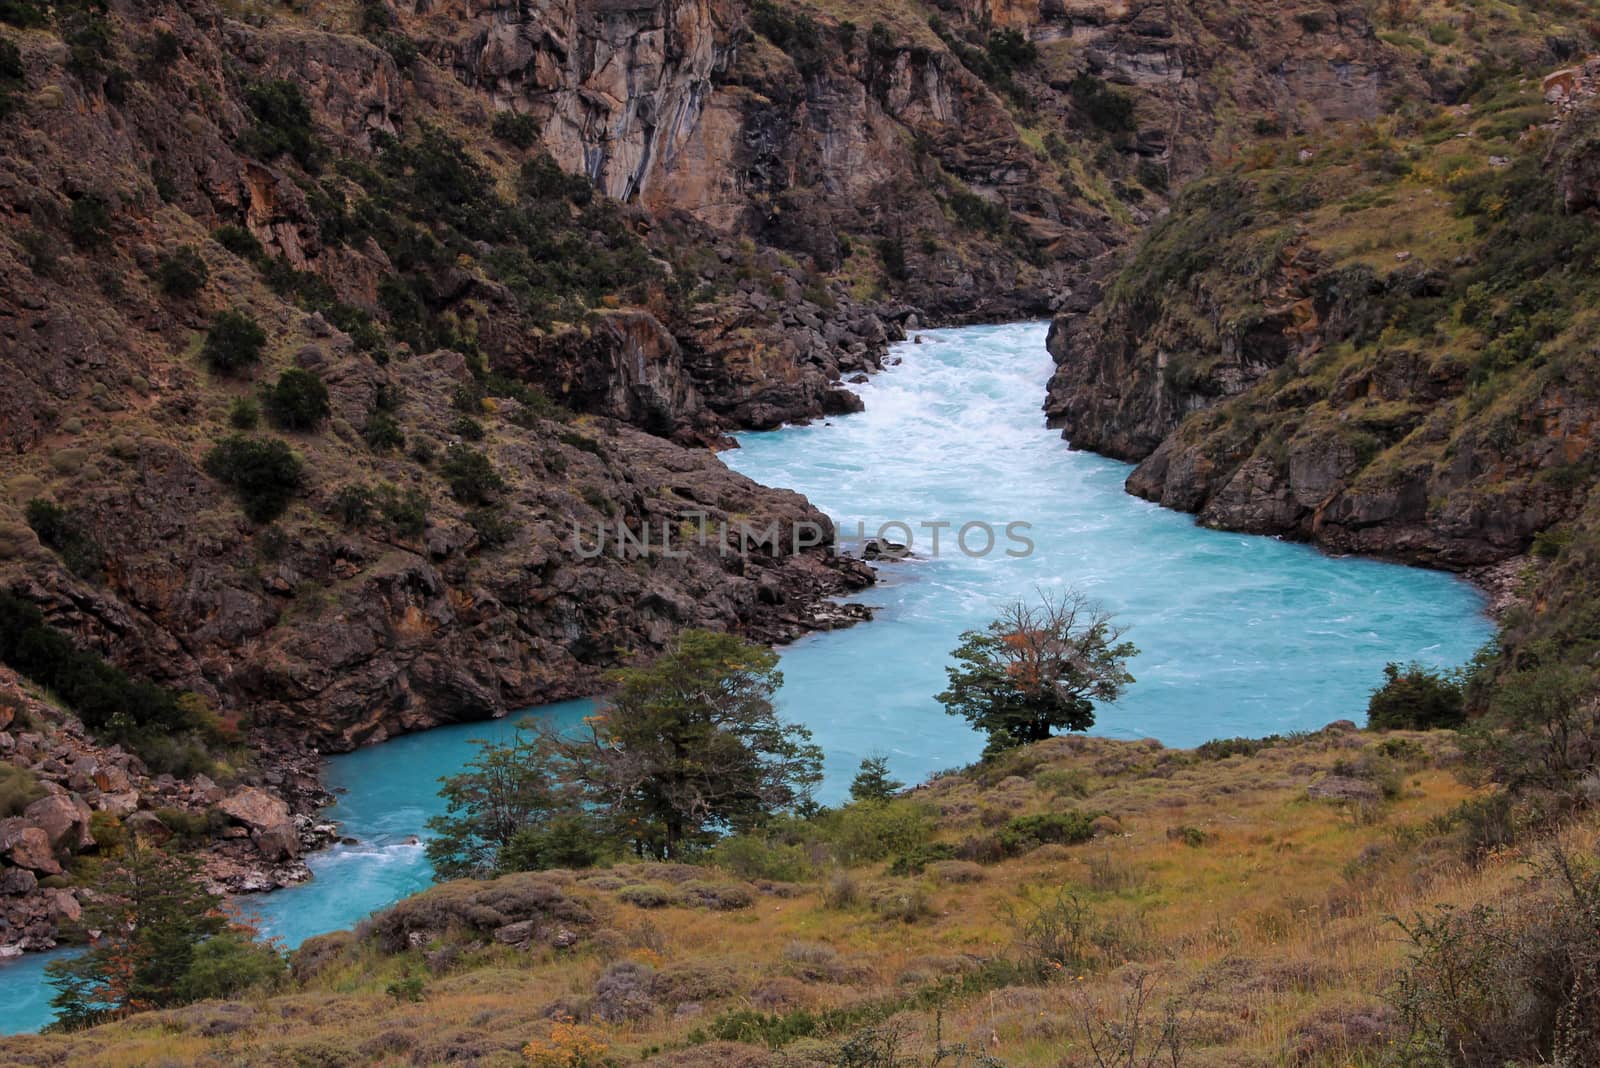 Beautiful blue Baker river, Carretera Austral, Patagonia, Chile by cicloco